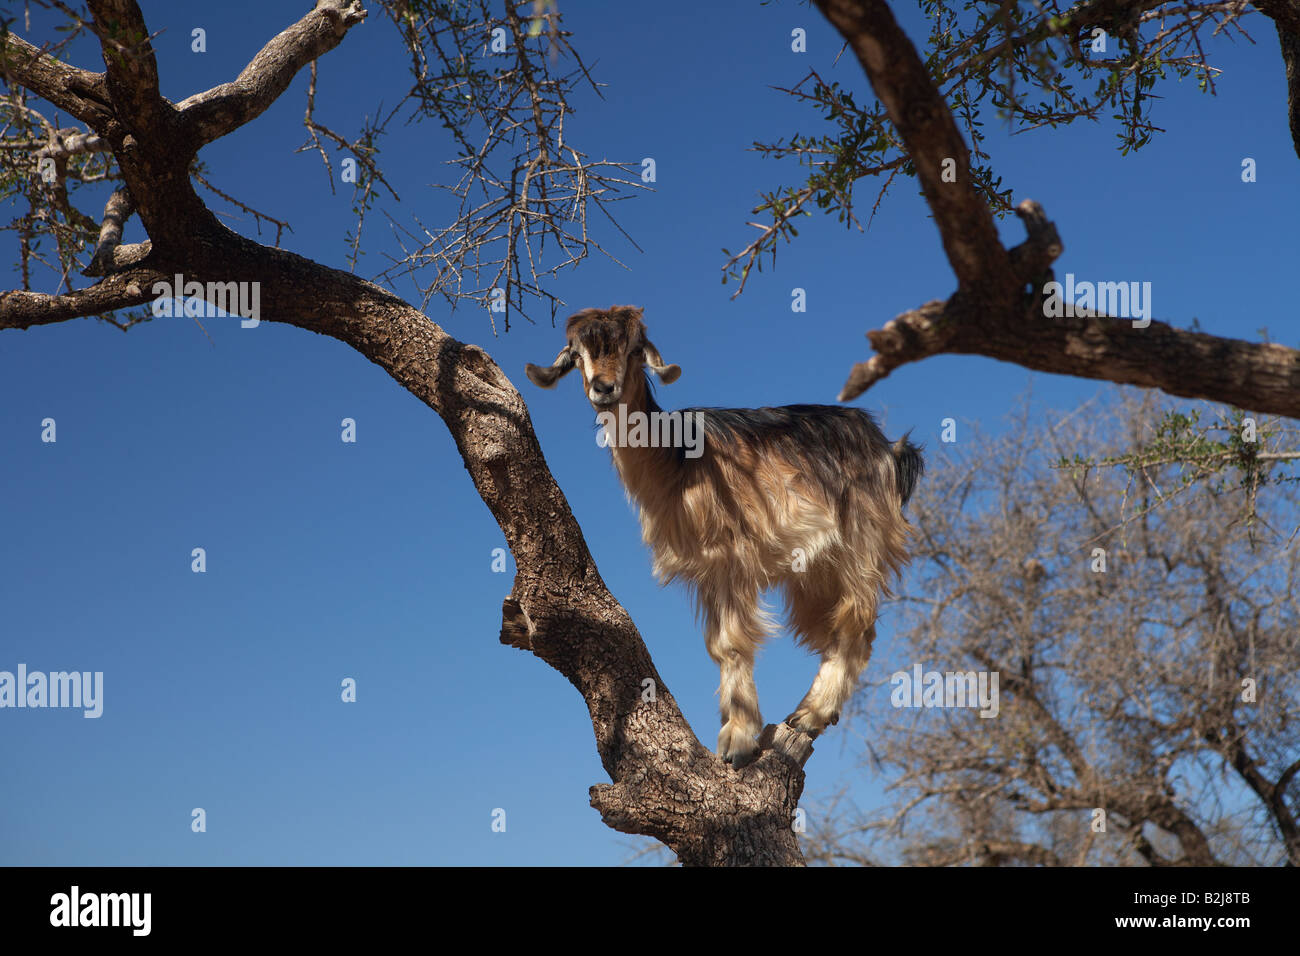 a goat perched in an argan tree north of Agadir, Morocco Stock Photo